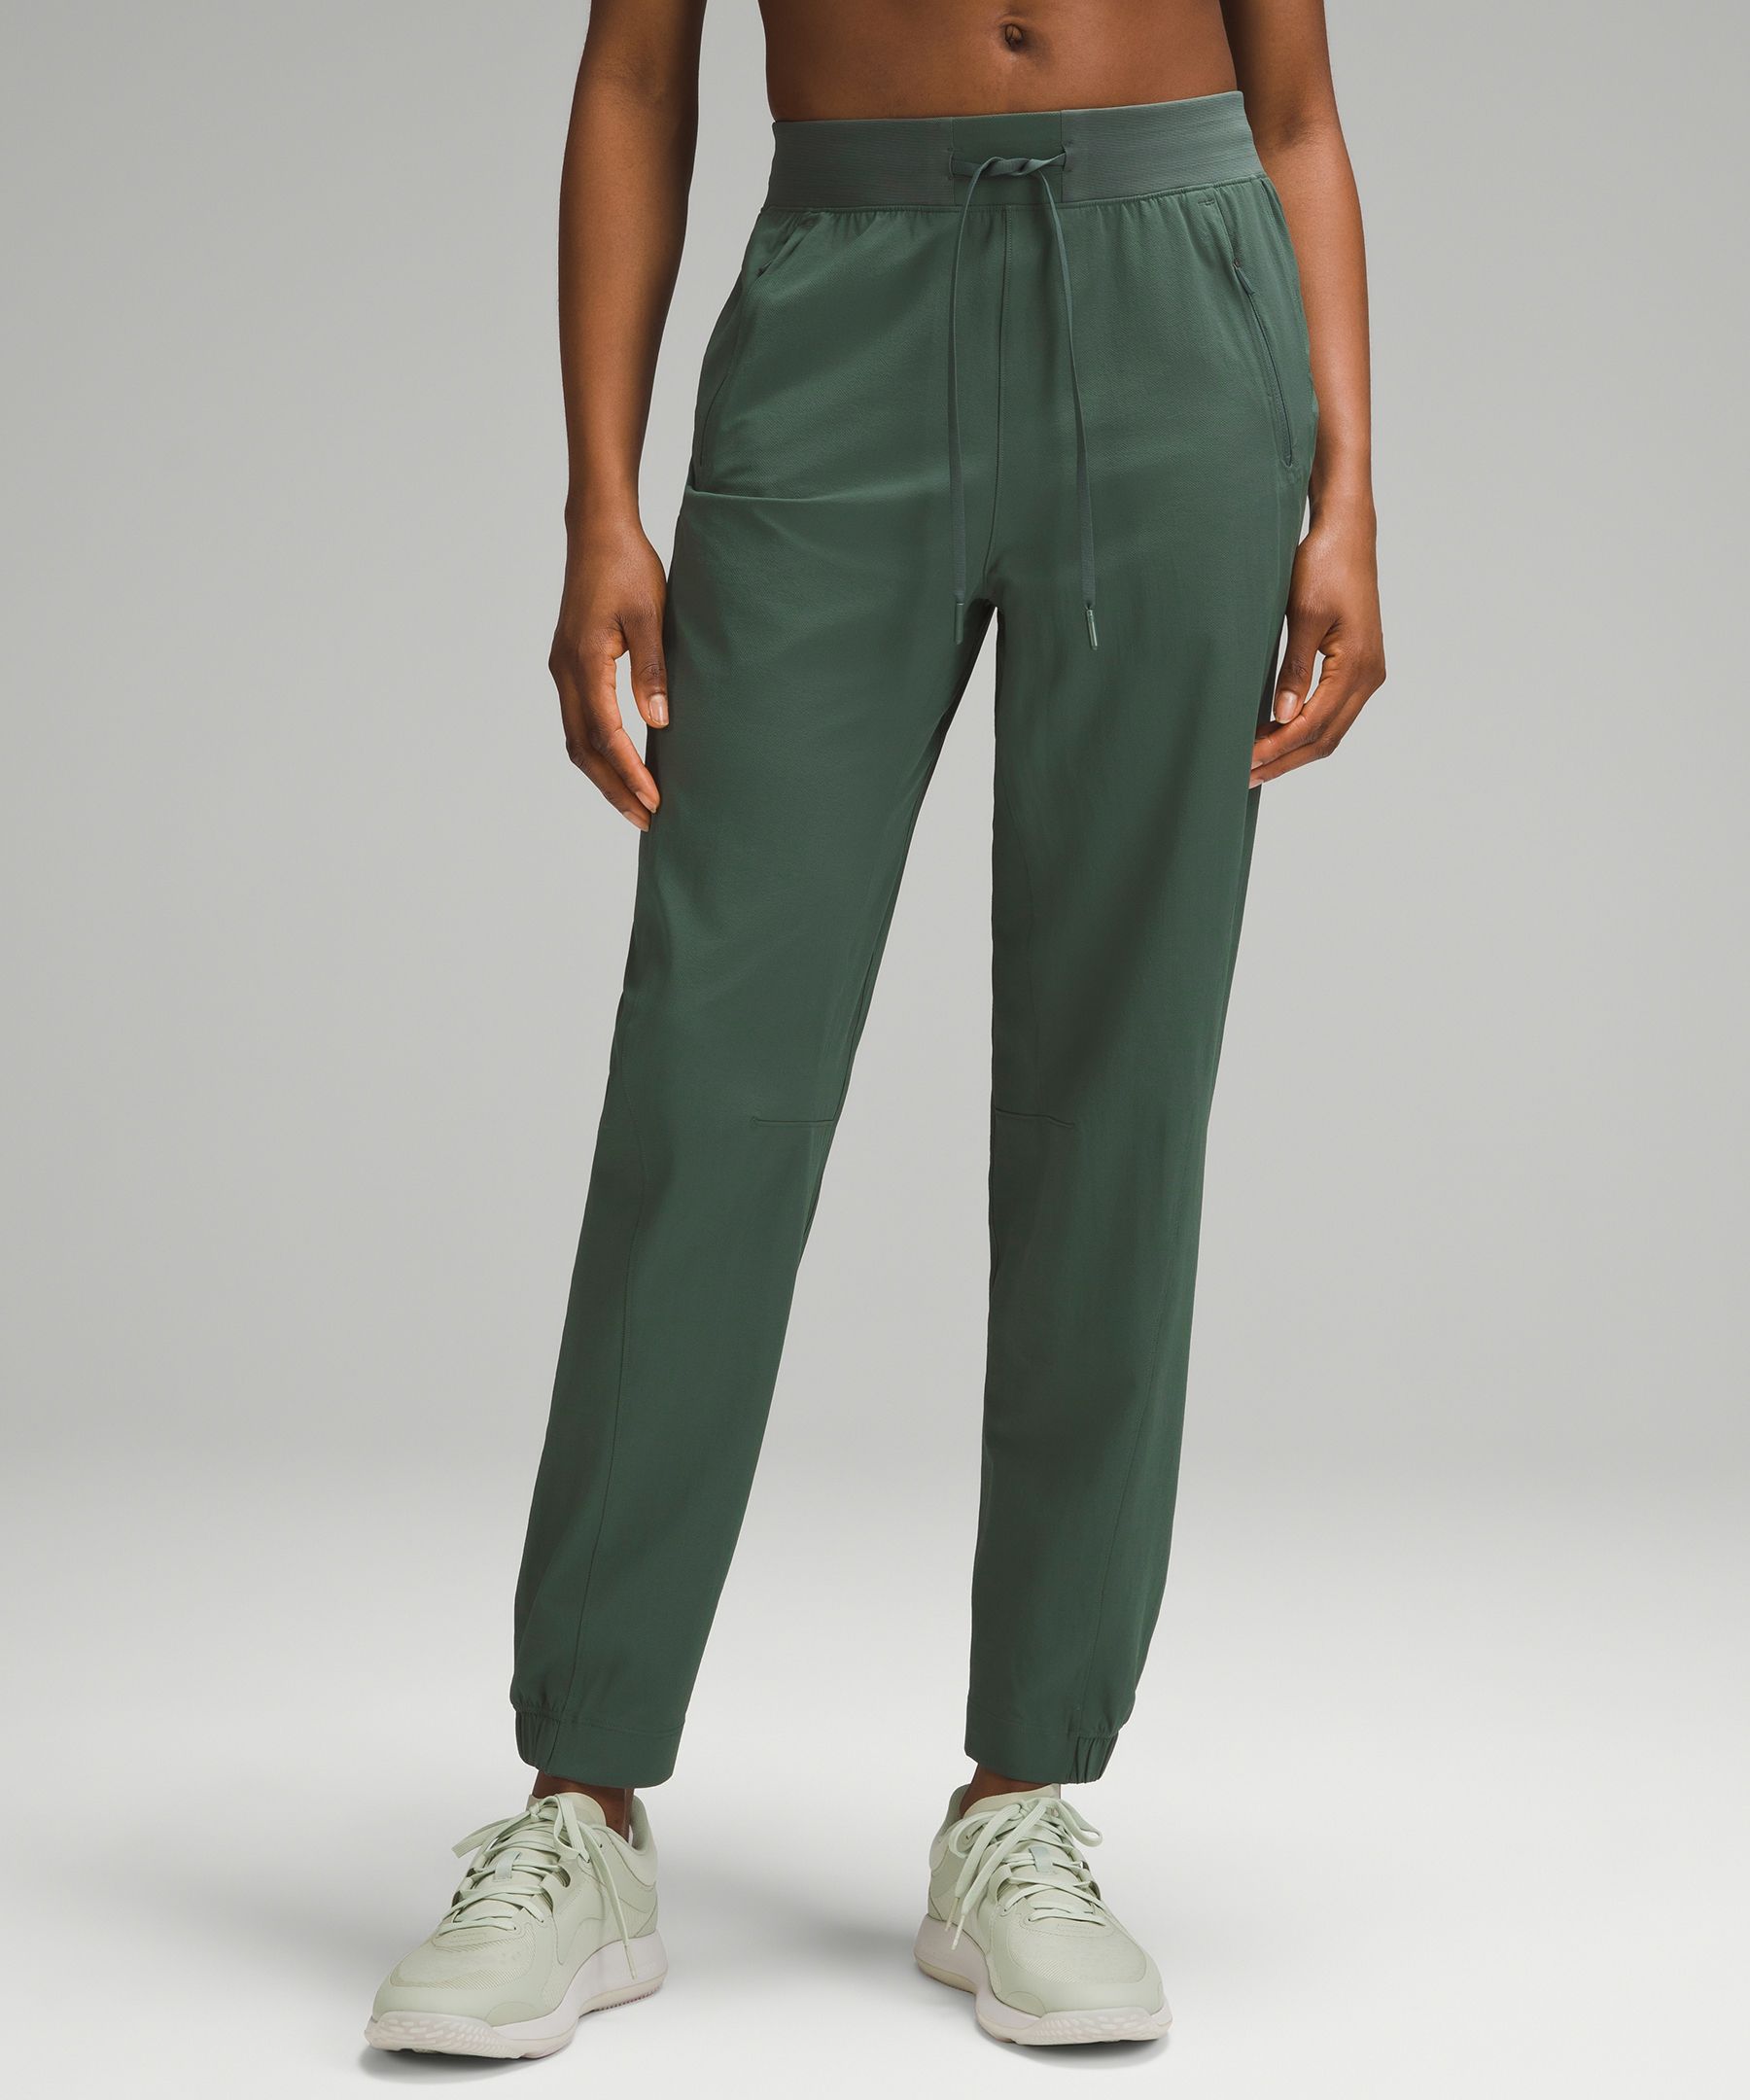 License to Train High-Rise Pant | Women's Joggers | lululemon